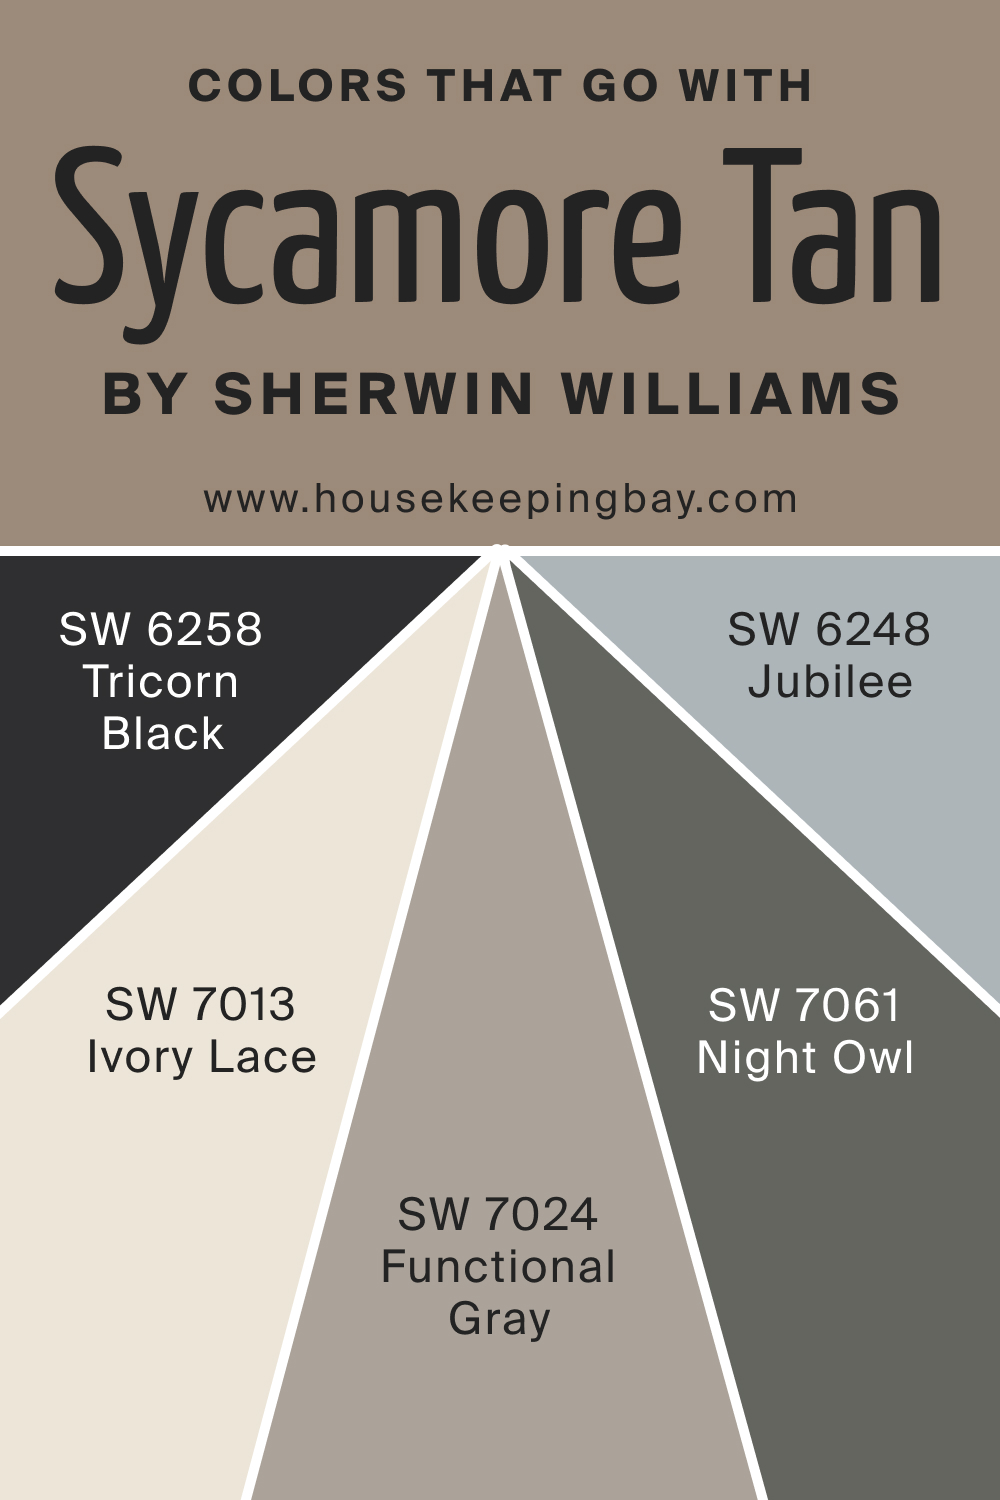 Colors that goes with SW 2855 Sycamore Tan by Sherwin Williams